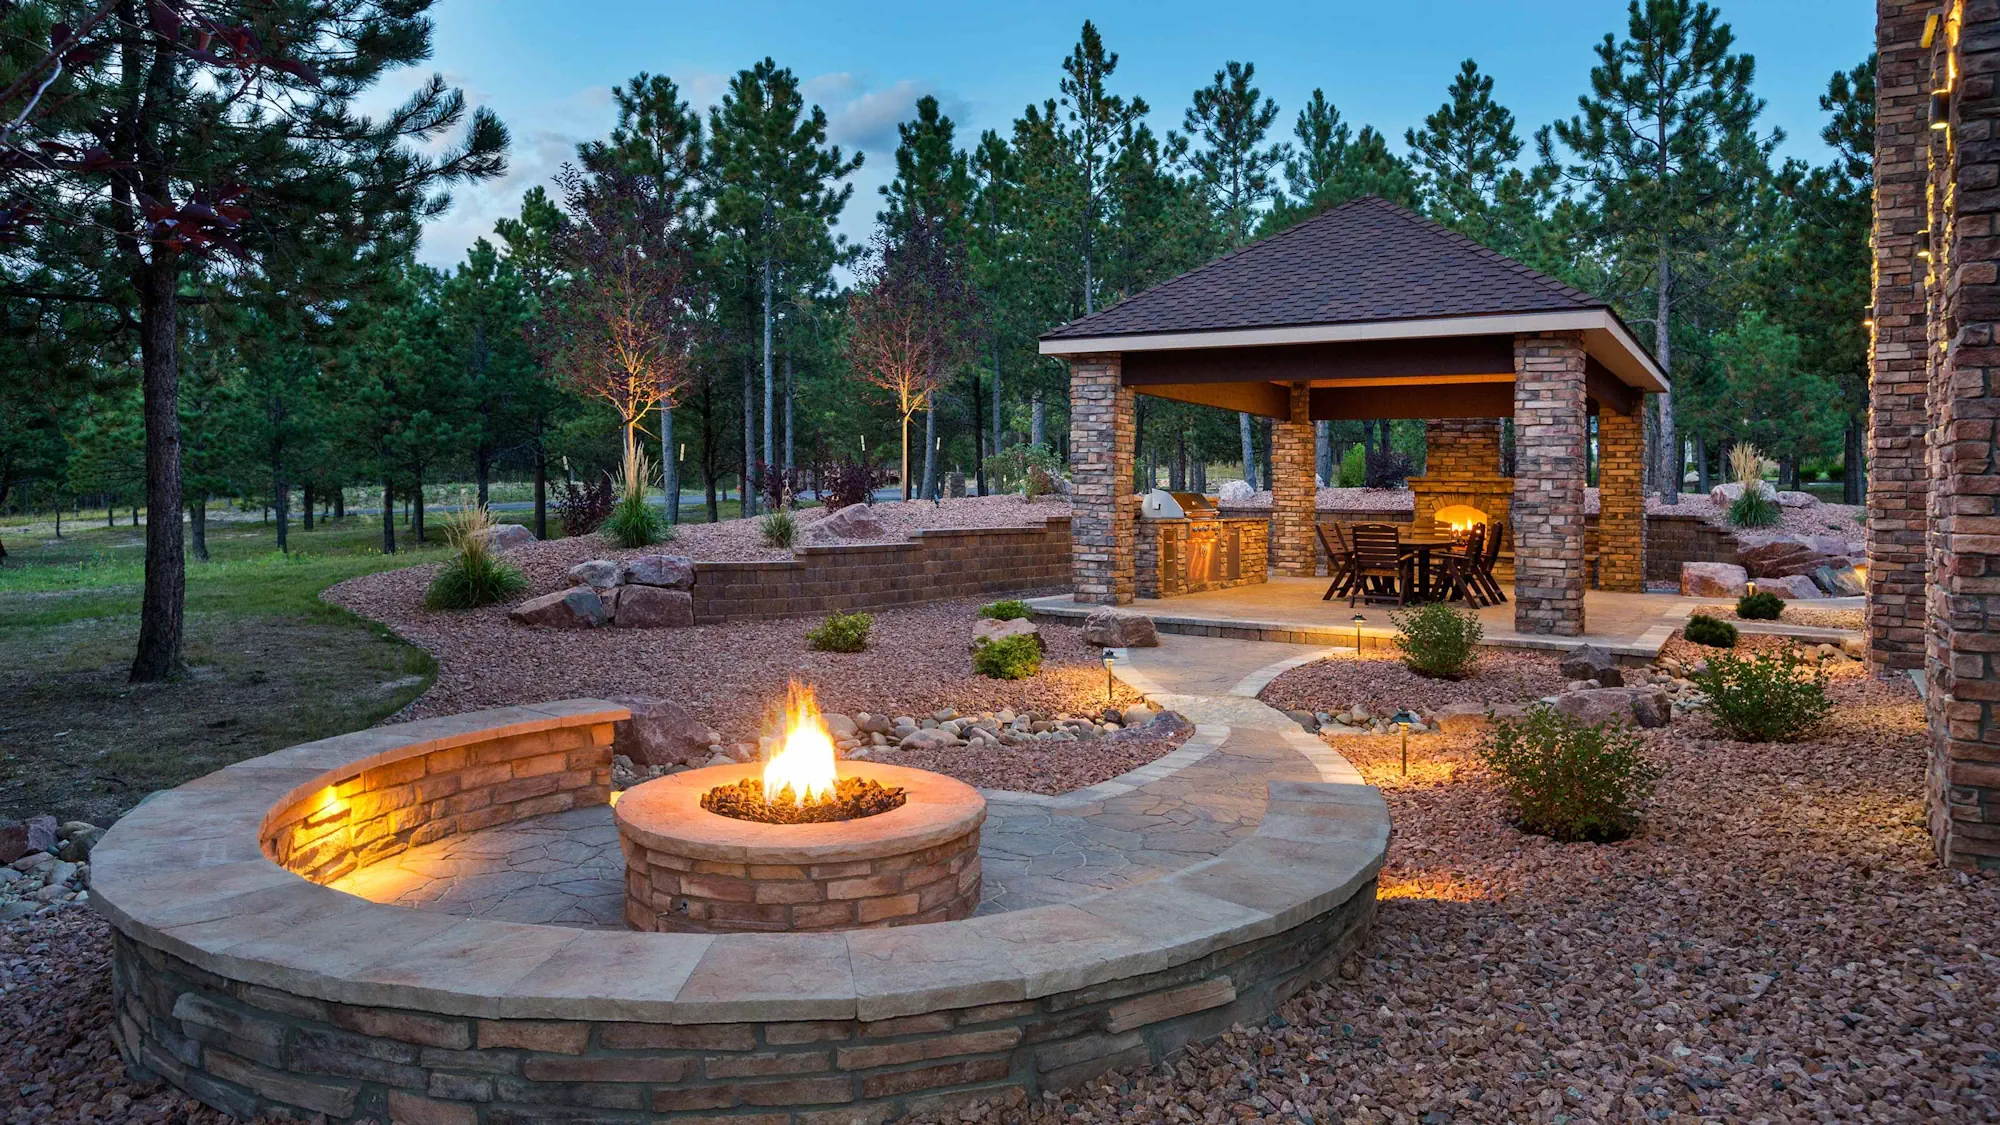 outdoor patio with modern fireplace at dusk